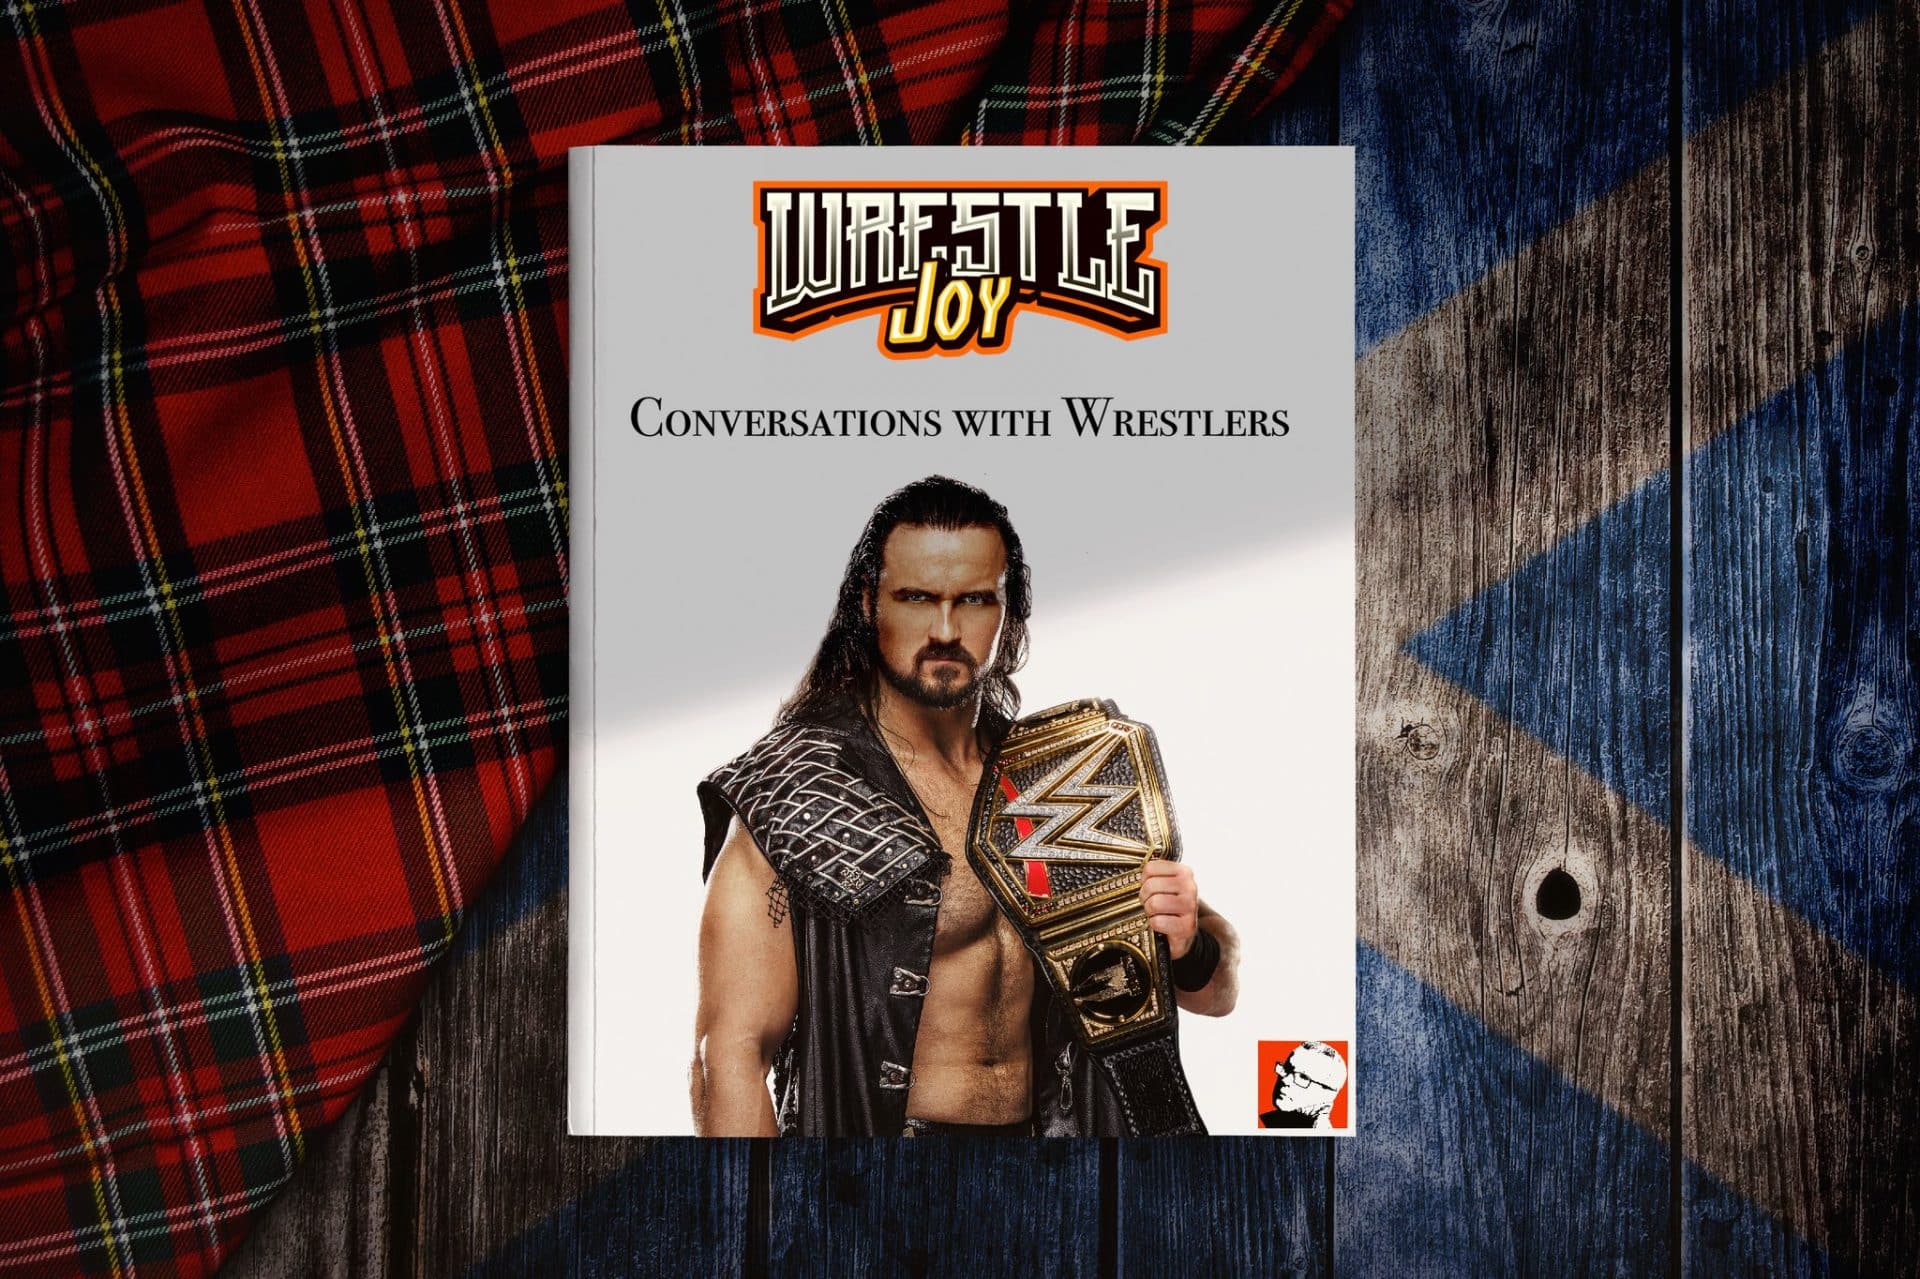 Conversations With Wrestlers: WWE Champion Drew McIntyre